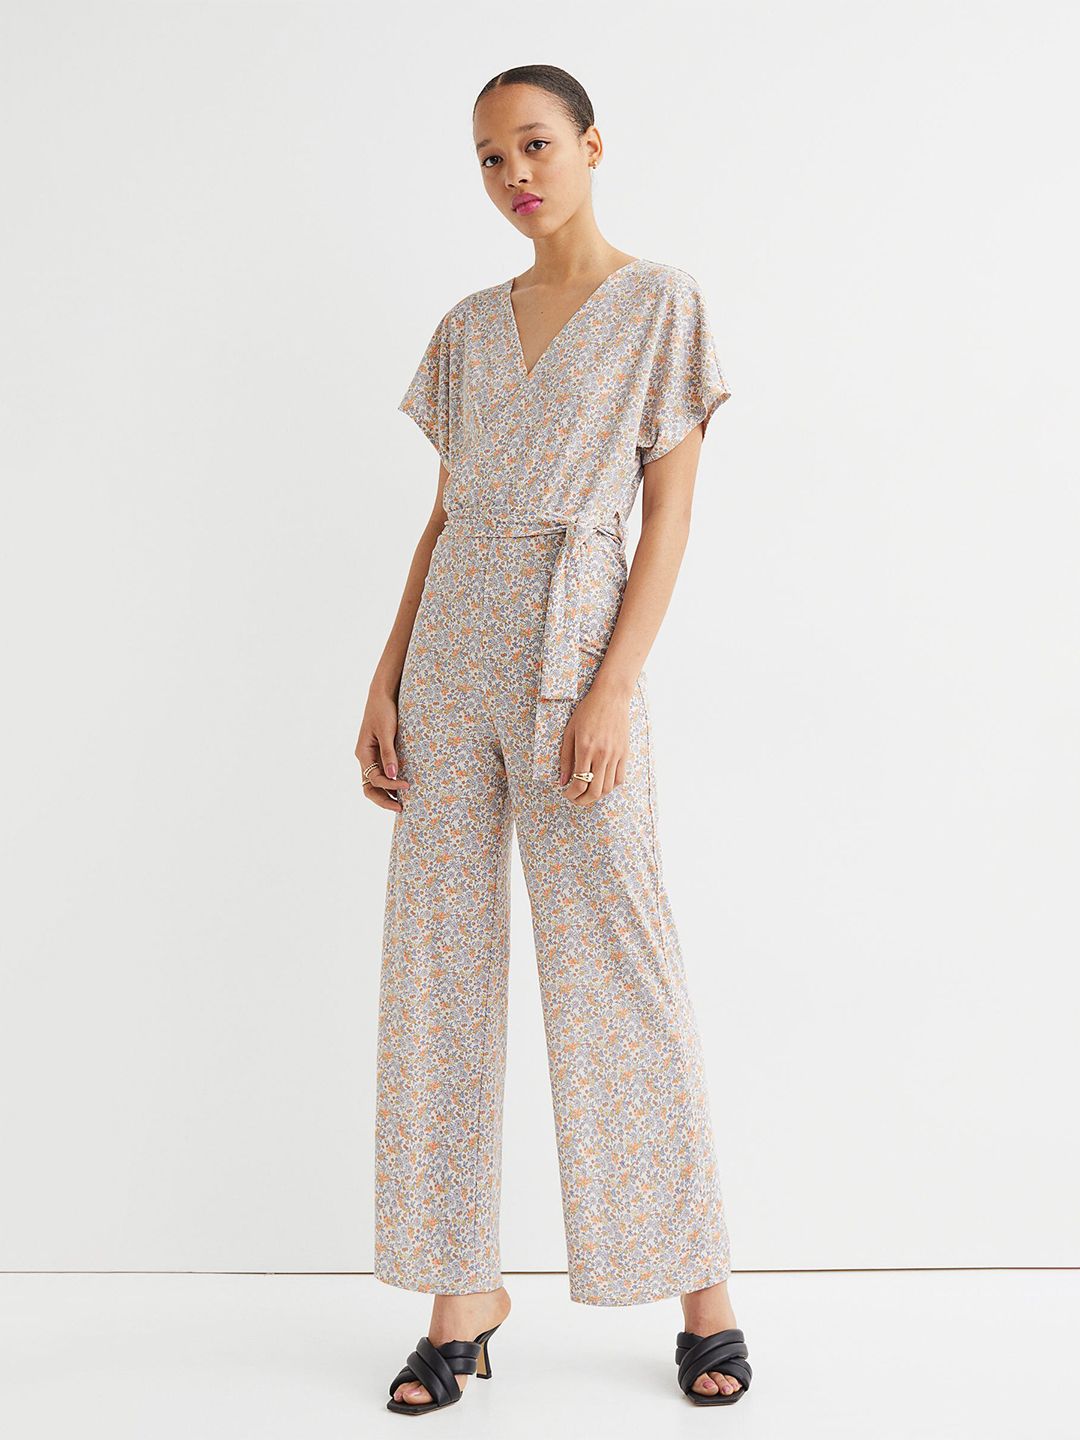 H&M Women Multicolored Floral Printed V-neck Jumpsuit Price in India